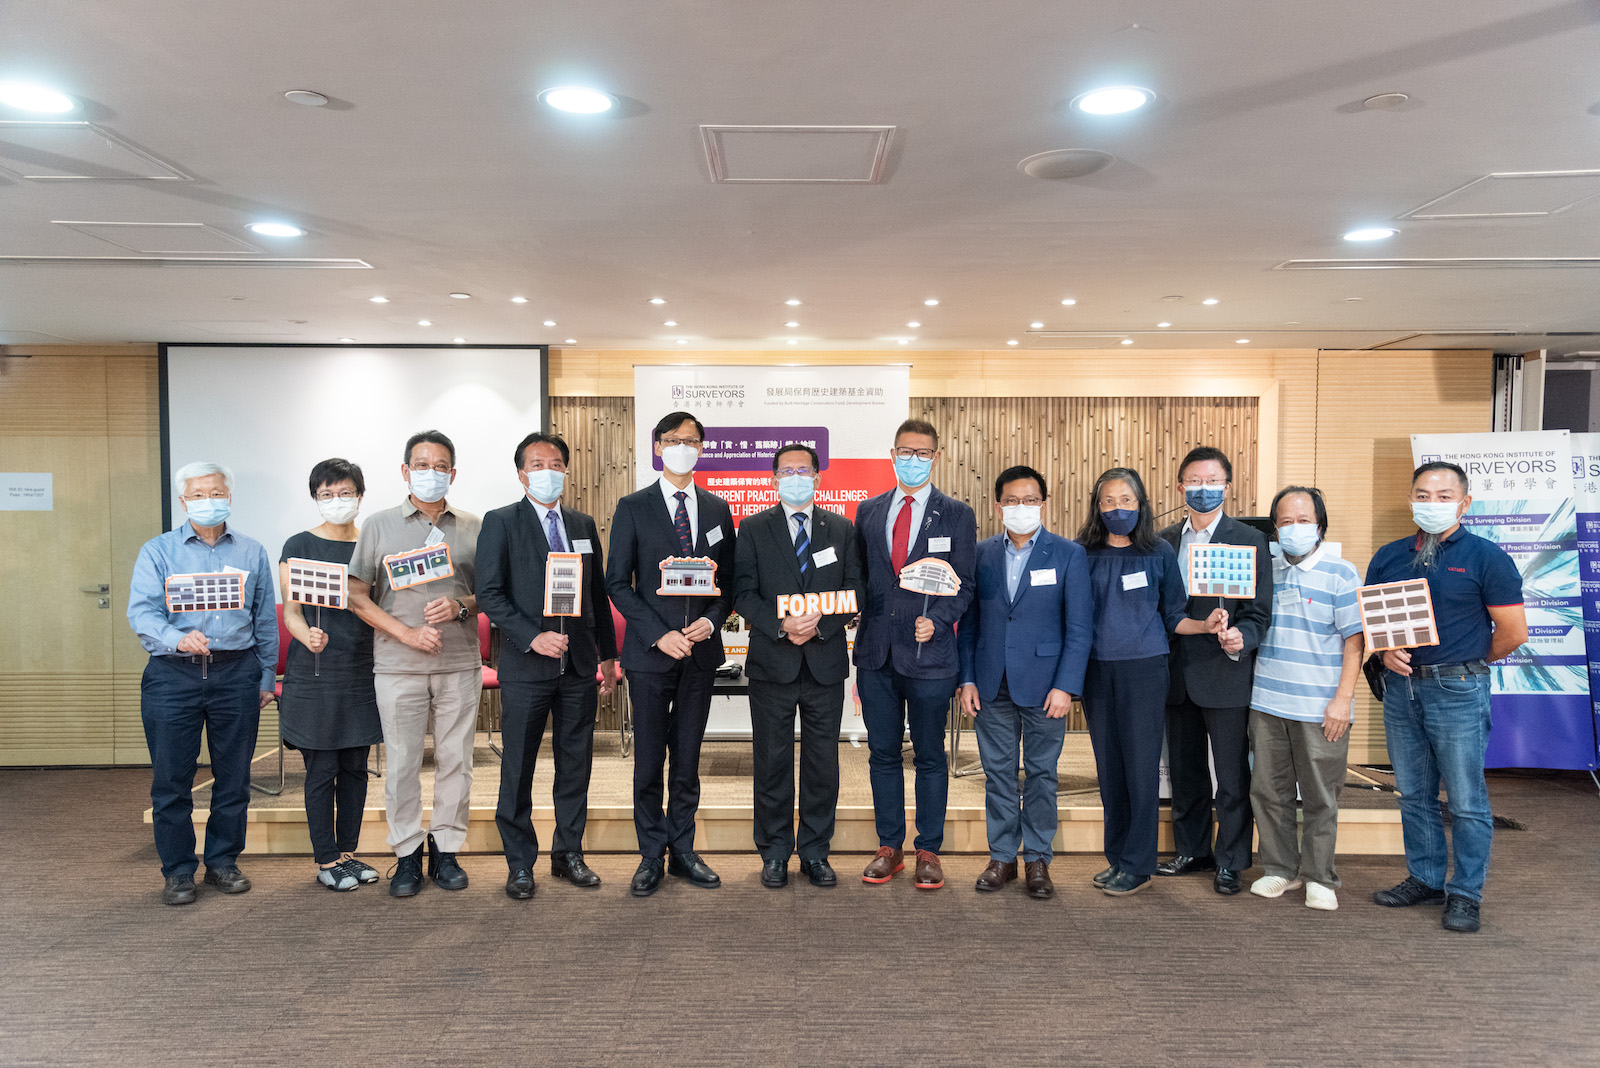 The Hong Kong Institute of Surveyors "Maintenance and Appreciation of Historical Buildings" Forum: Current Practices and Challenges in Built Heritage Conservation